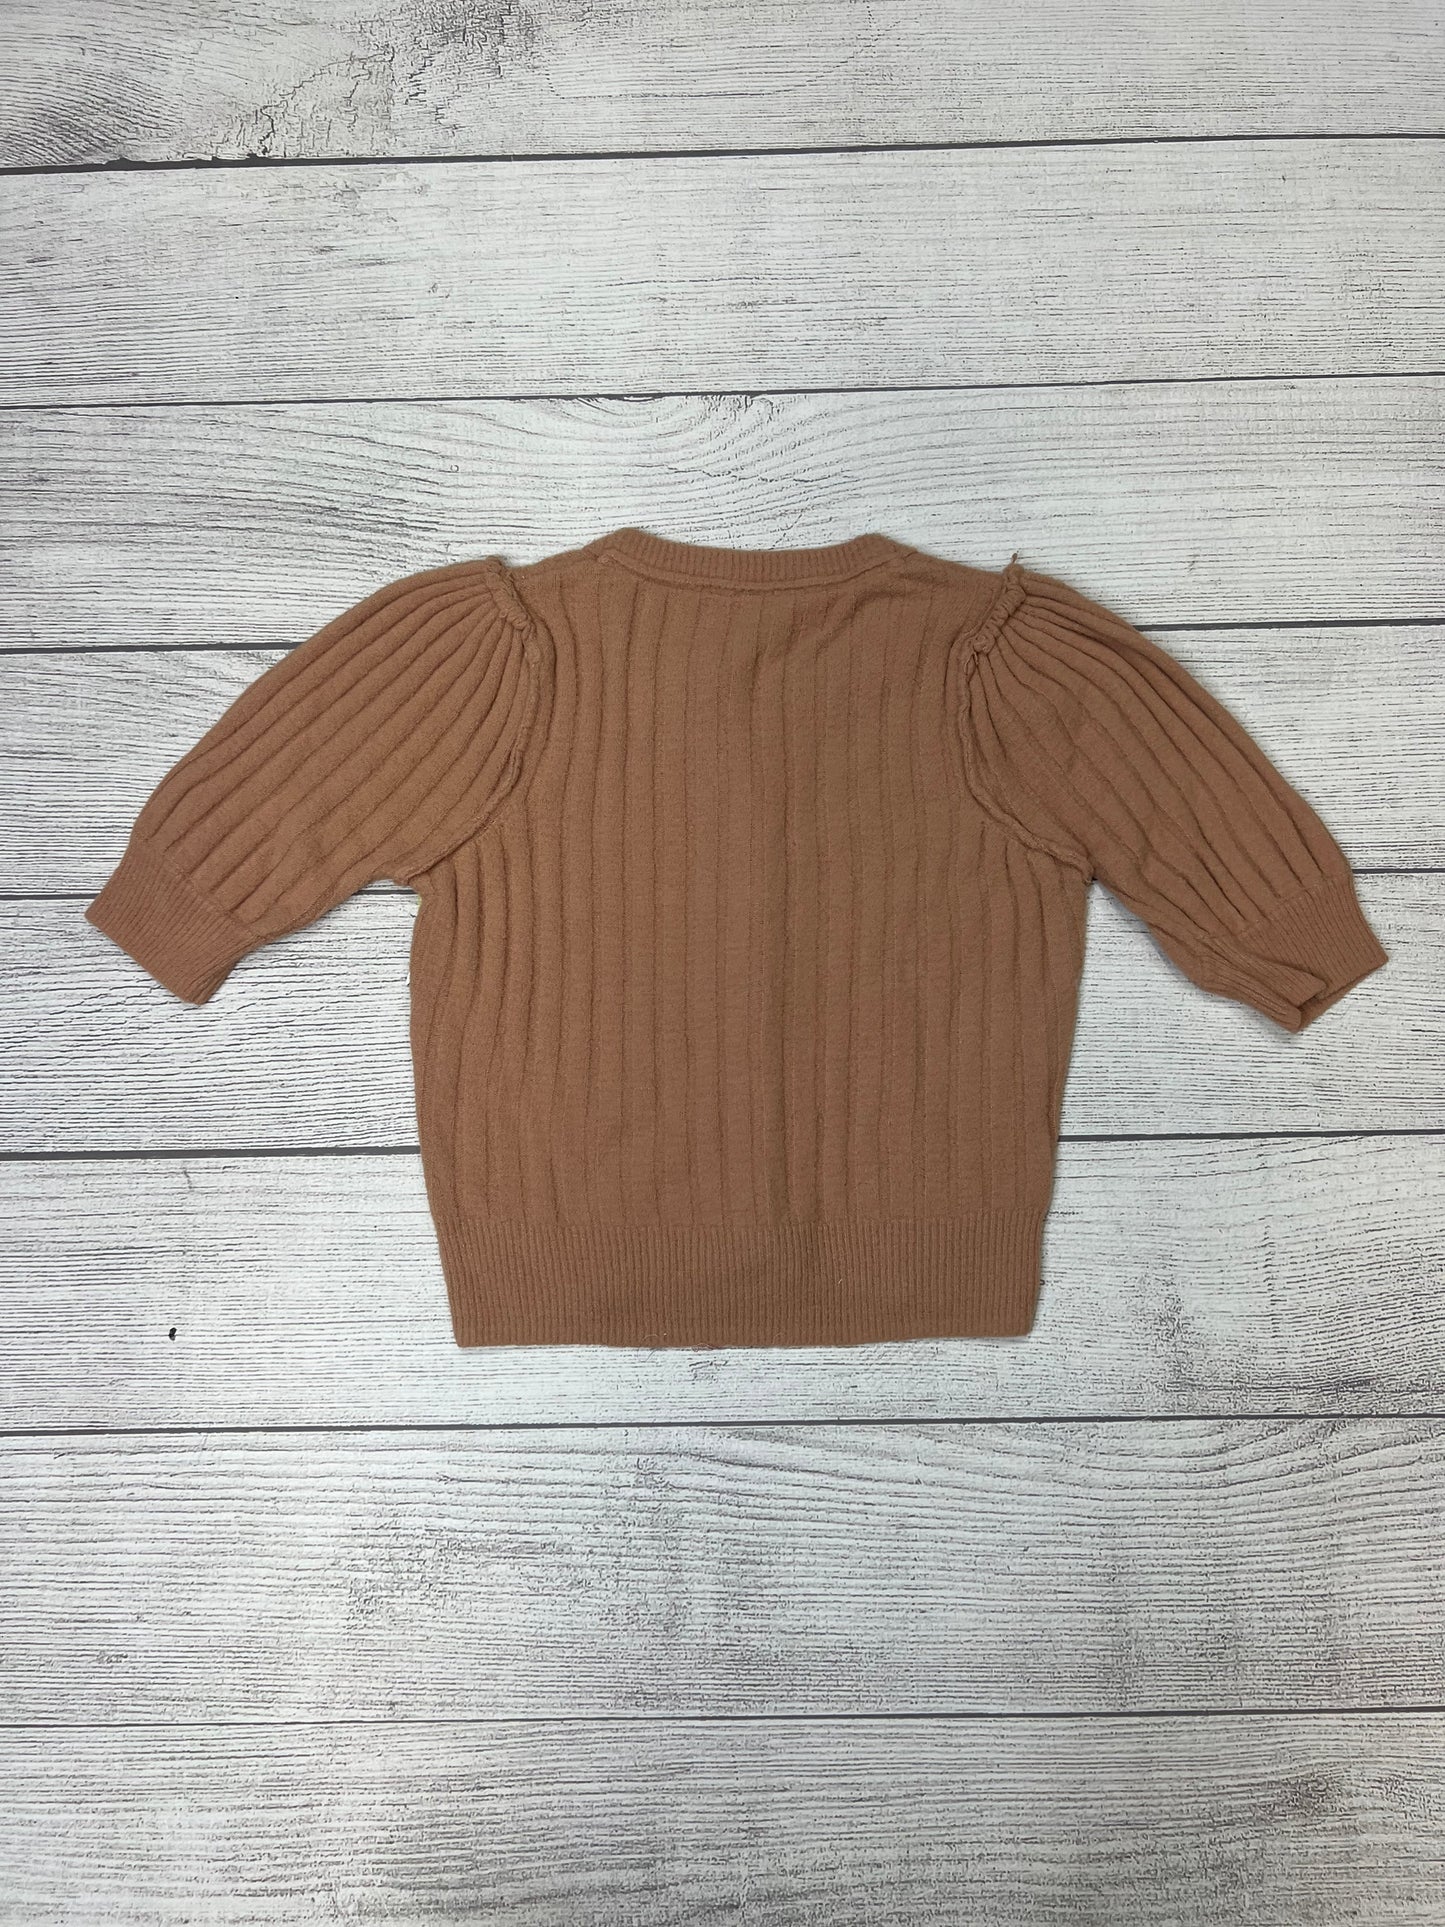 Brown Top Short Sleeve Free People, Size S